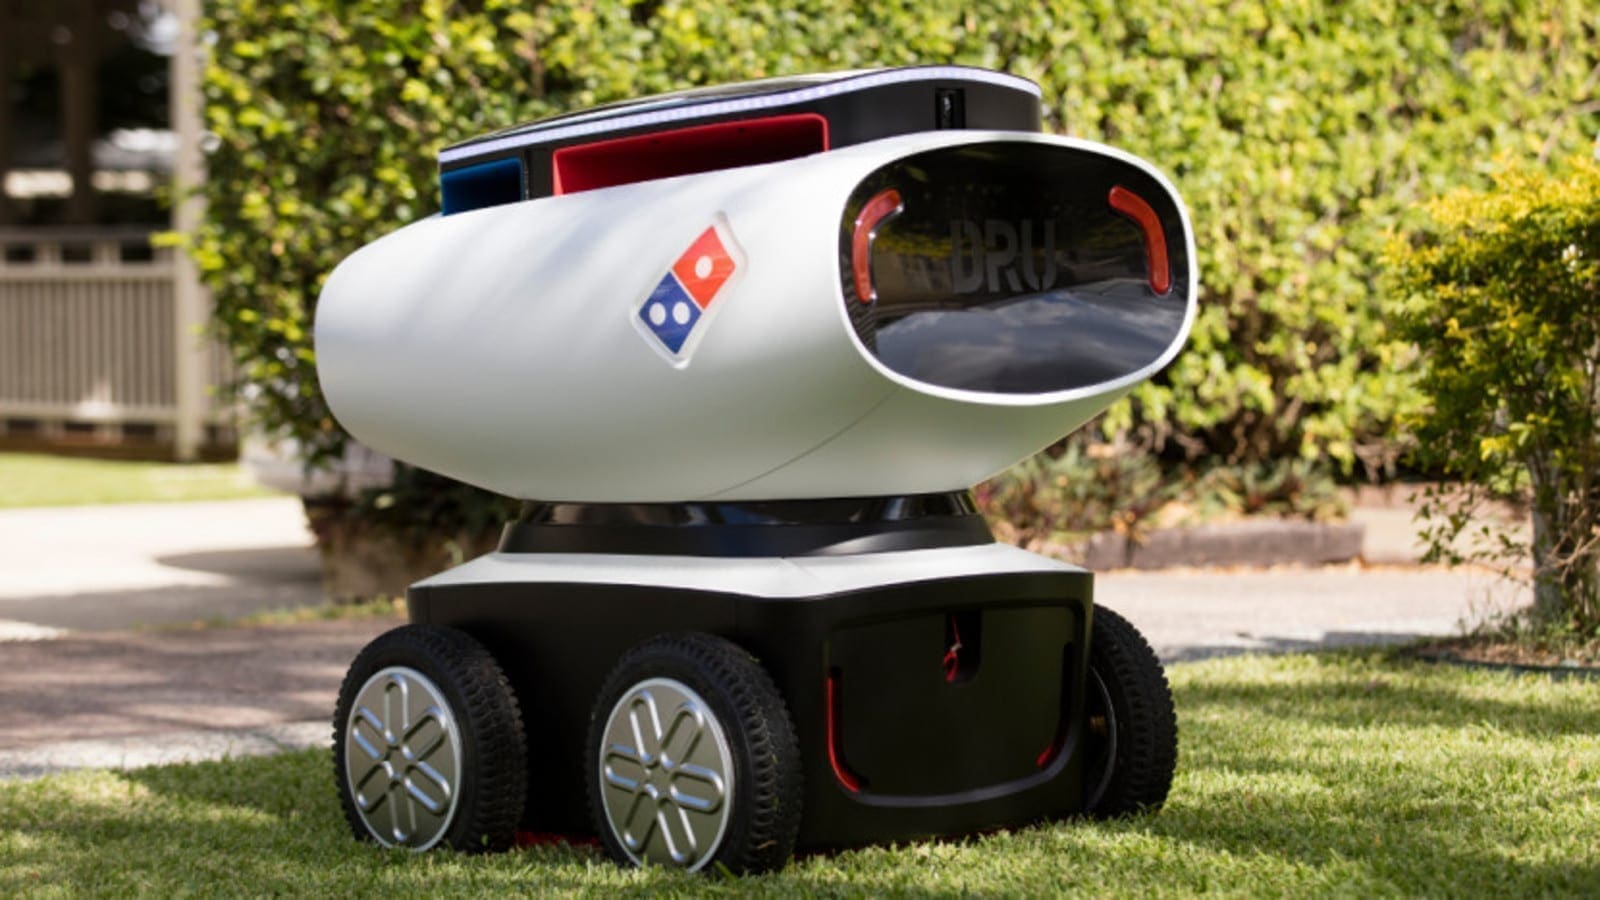 Dominos becomes the first US food service restaurant to use fully autonomous vehicles for pizza delivery